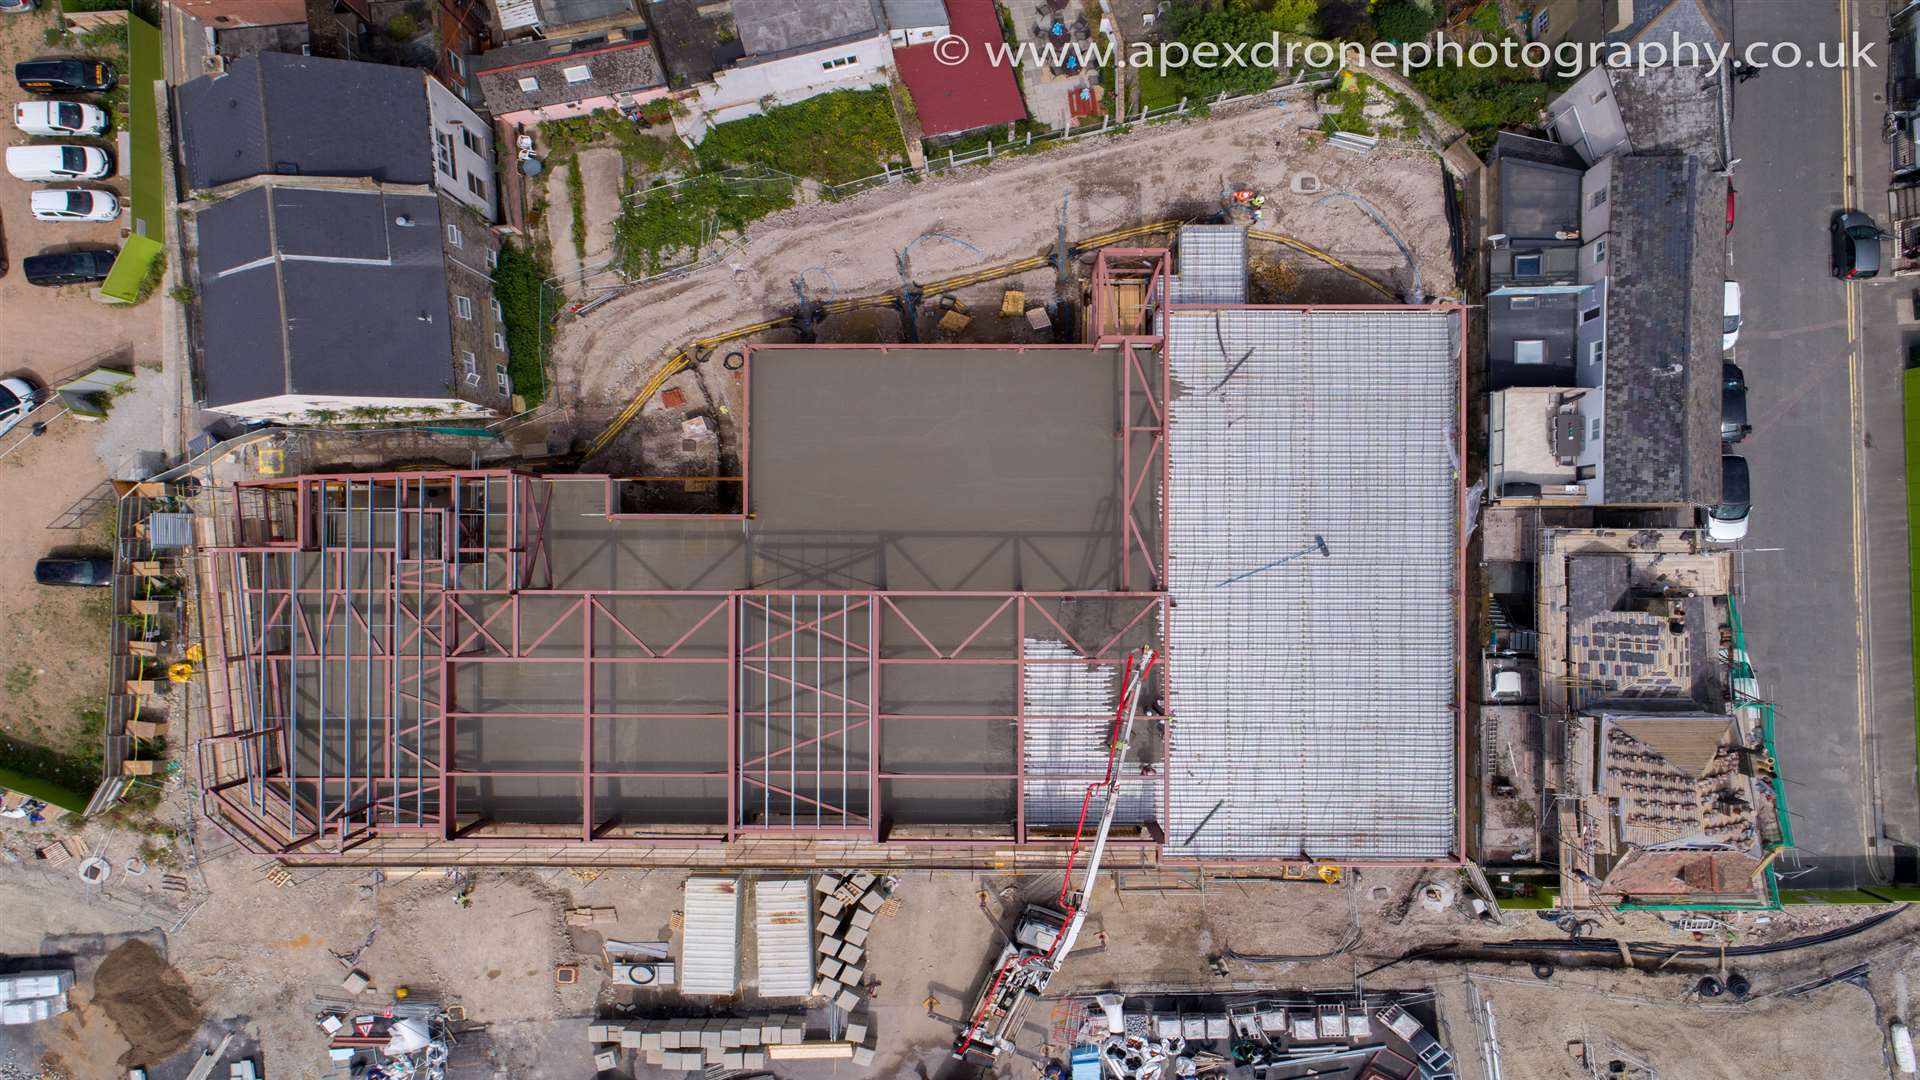 Aerial photographs of the St James development in Dover taken using a drone